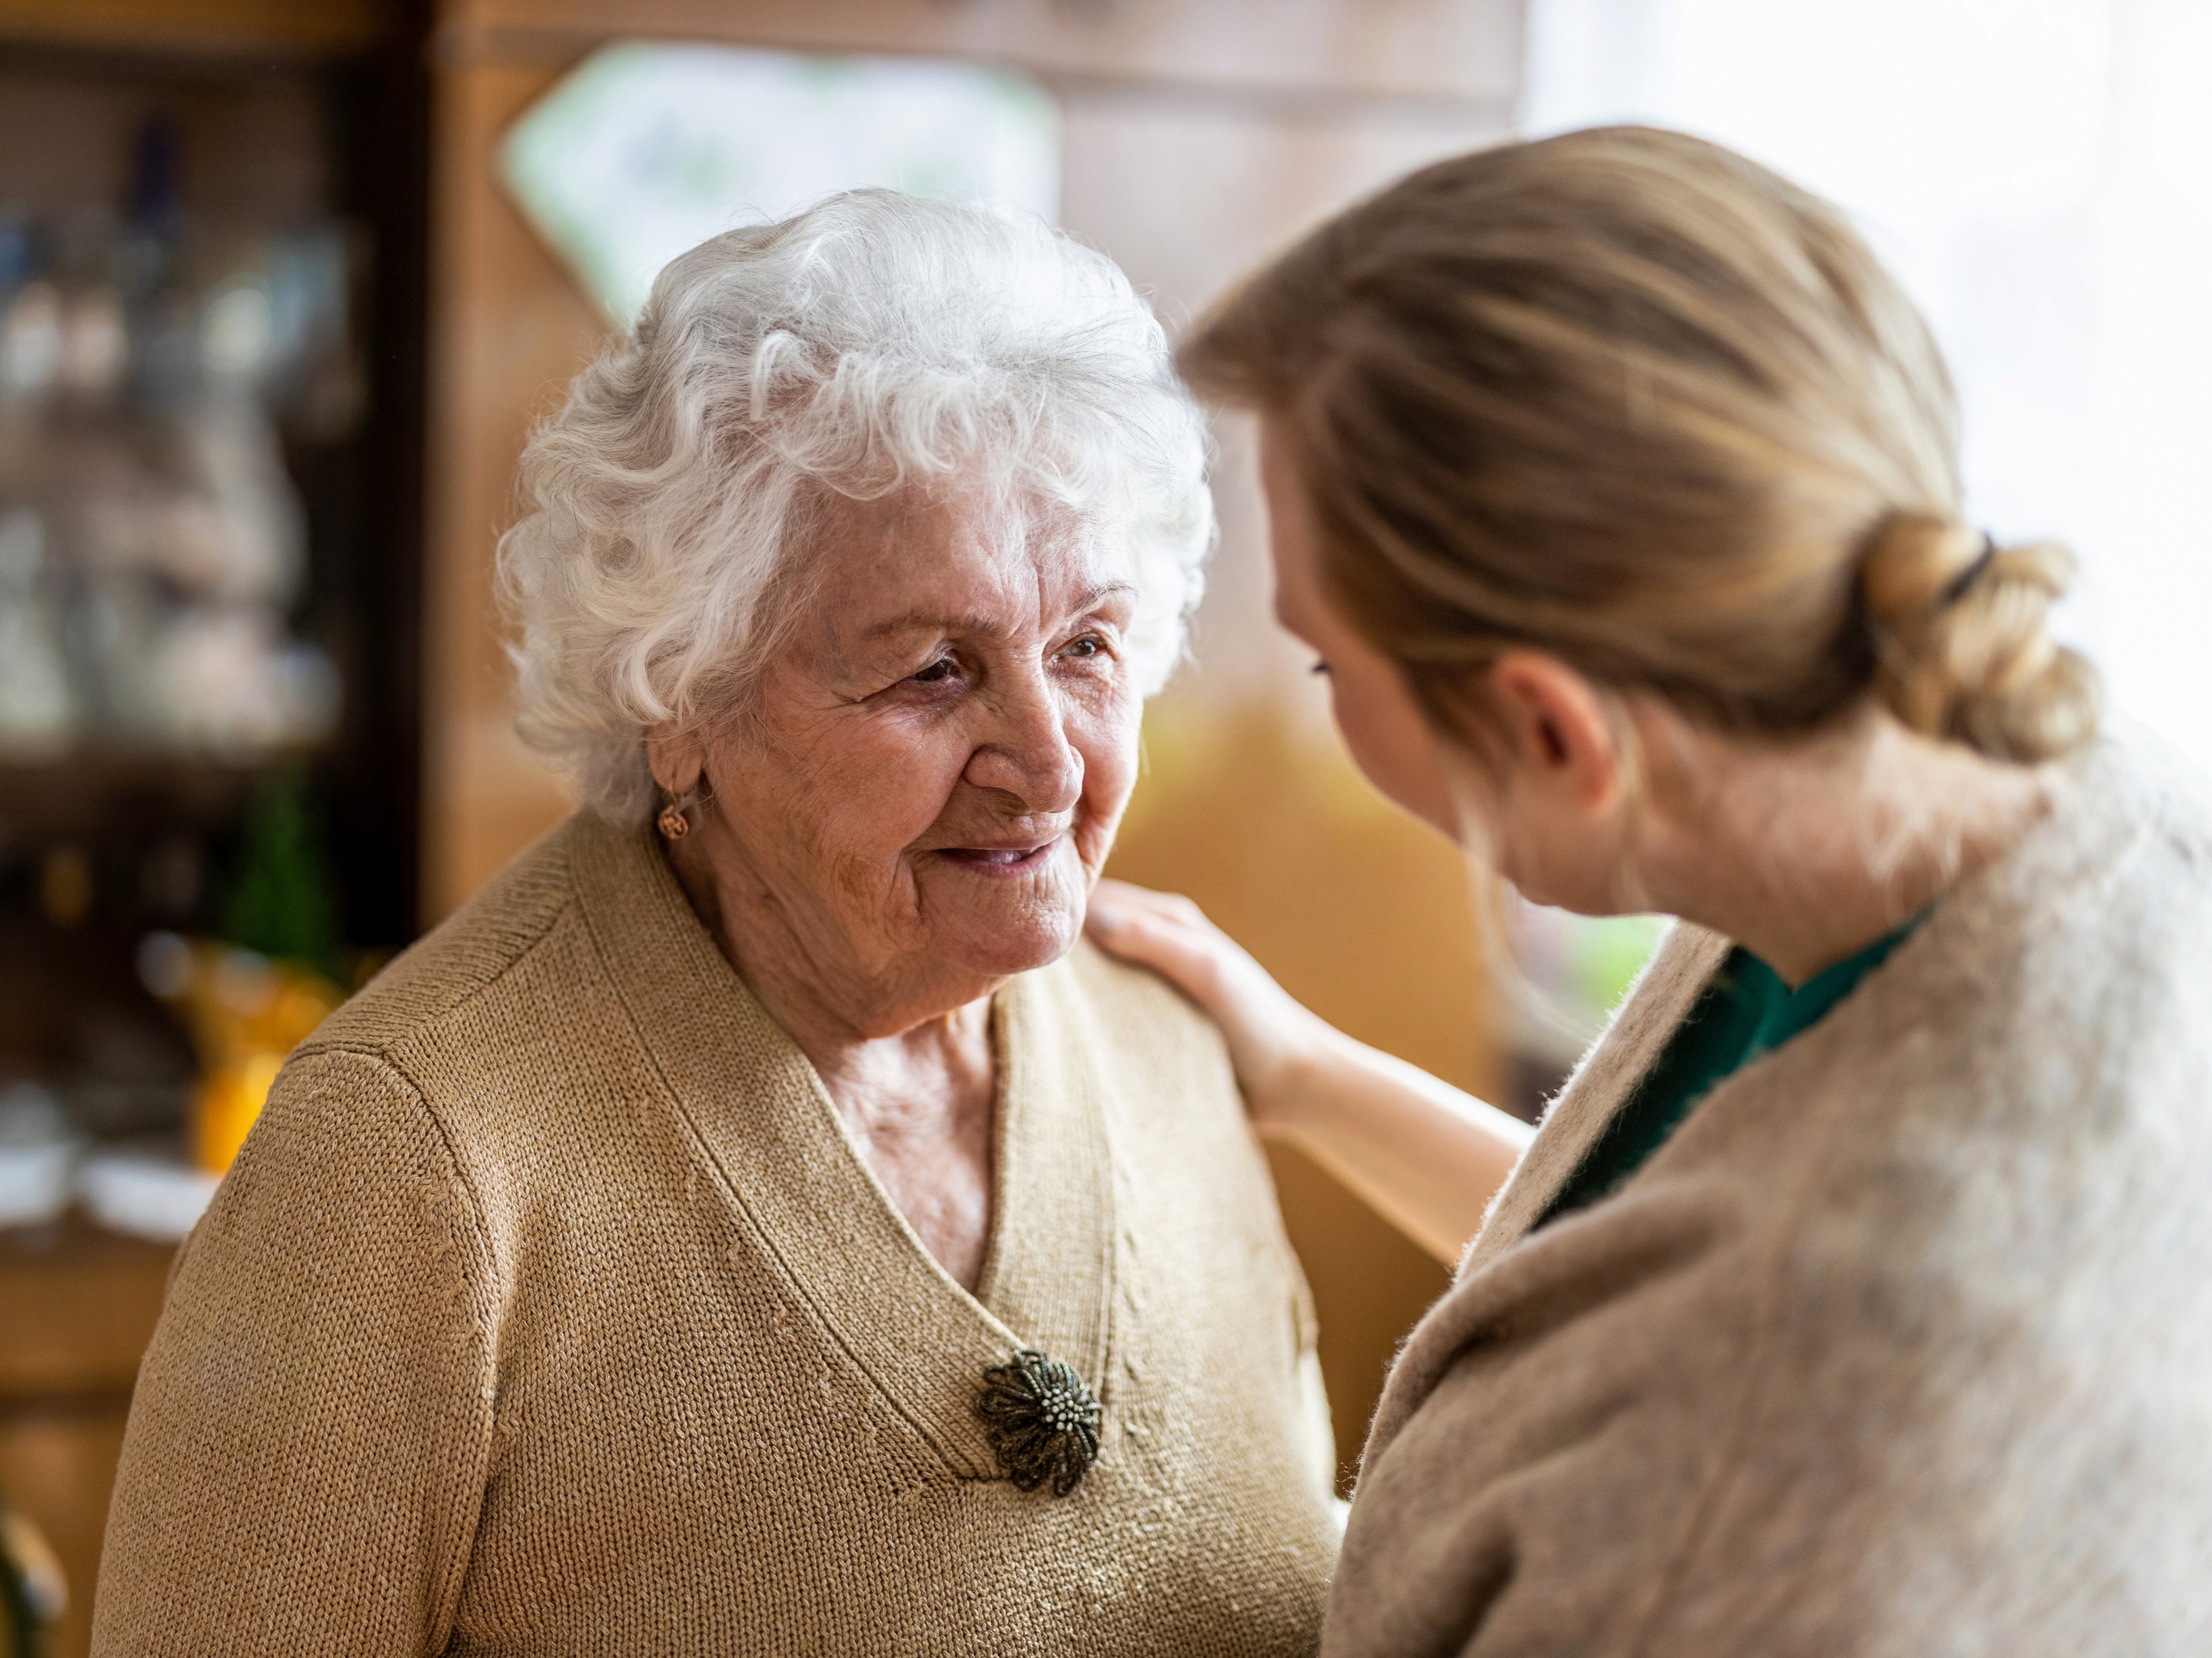 A health visitor talking to a senior citizen during a home visit